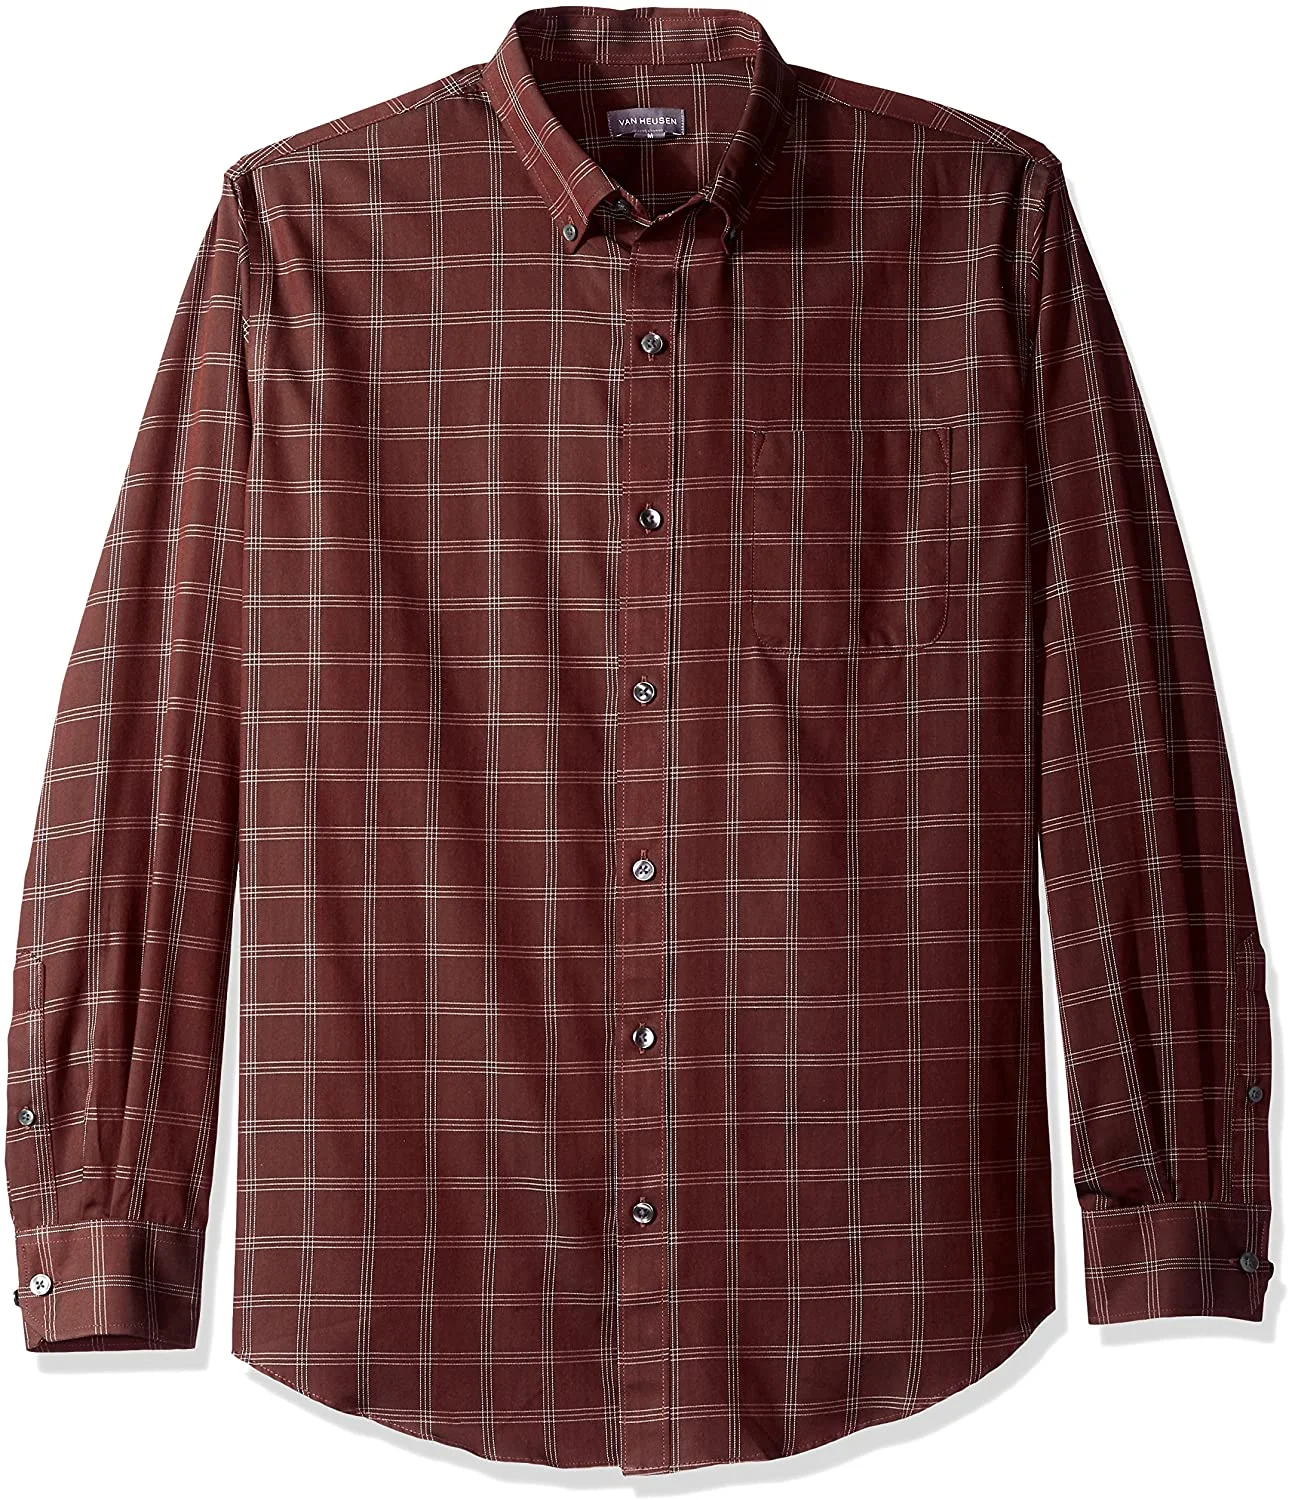 Wholesale Mens Wrinkle Free Long Sleeve Button Down Shirt Manufacturers In Bangladesh Factory Supplier